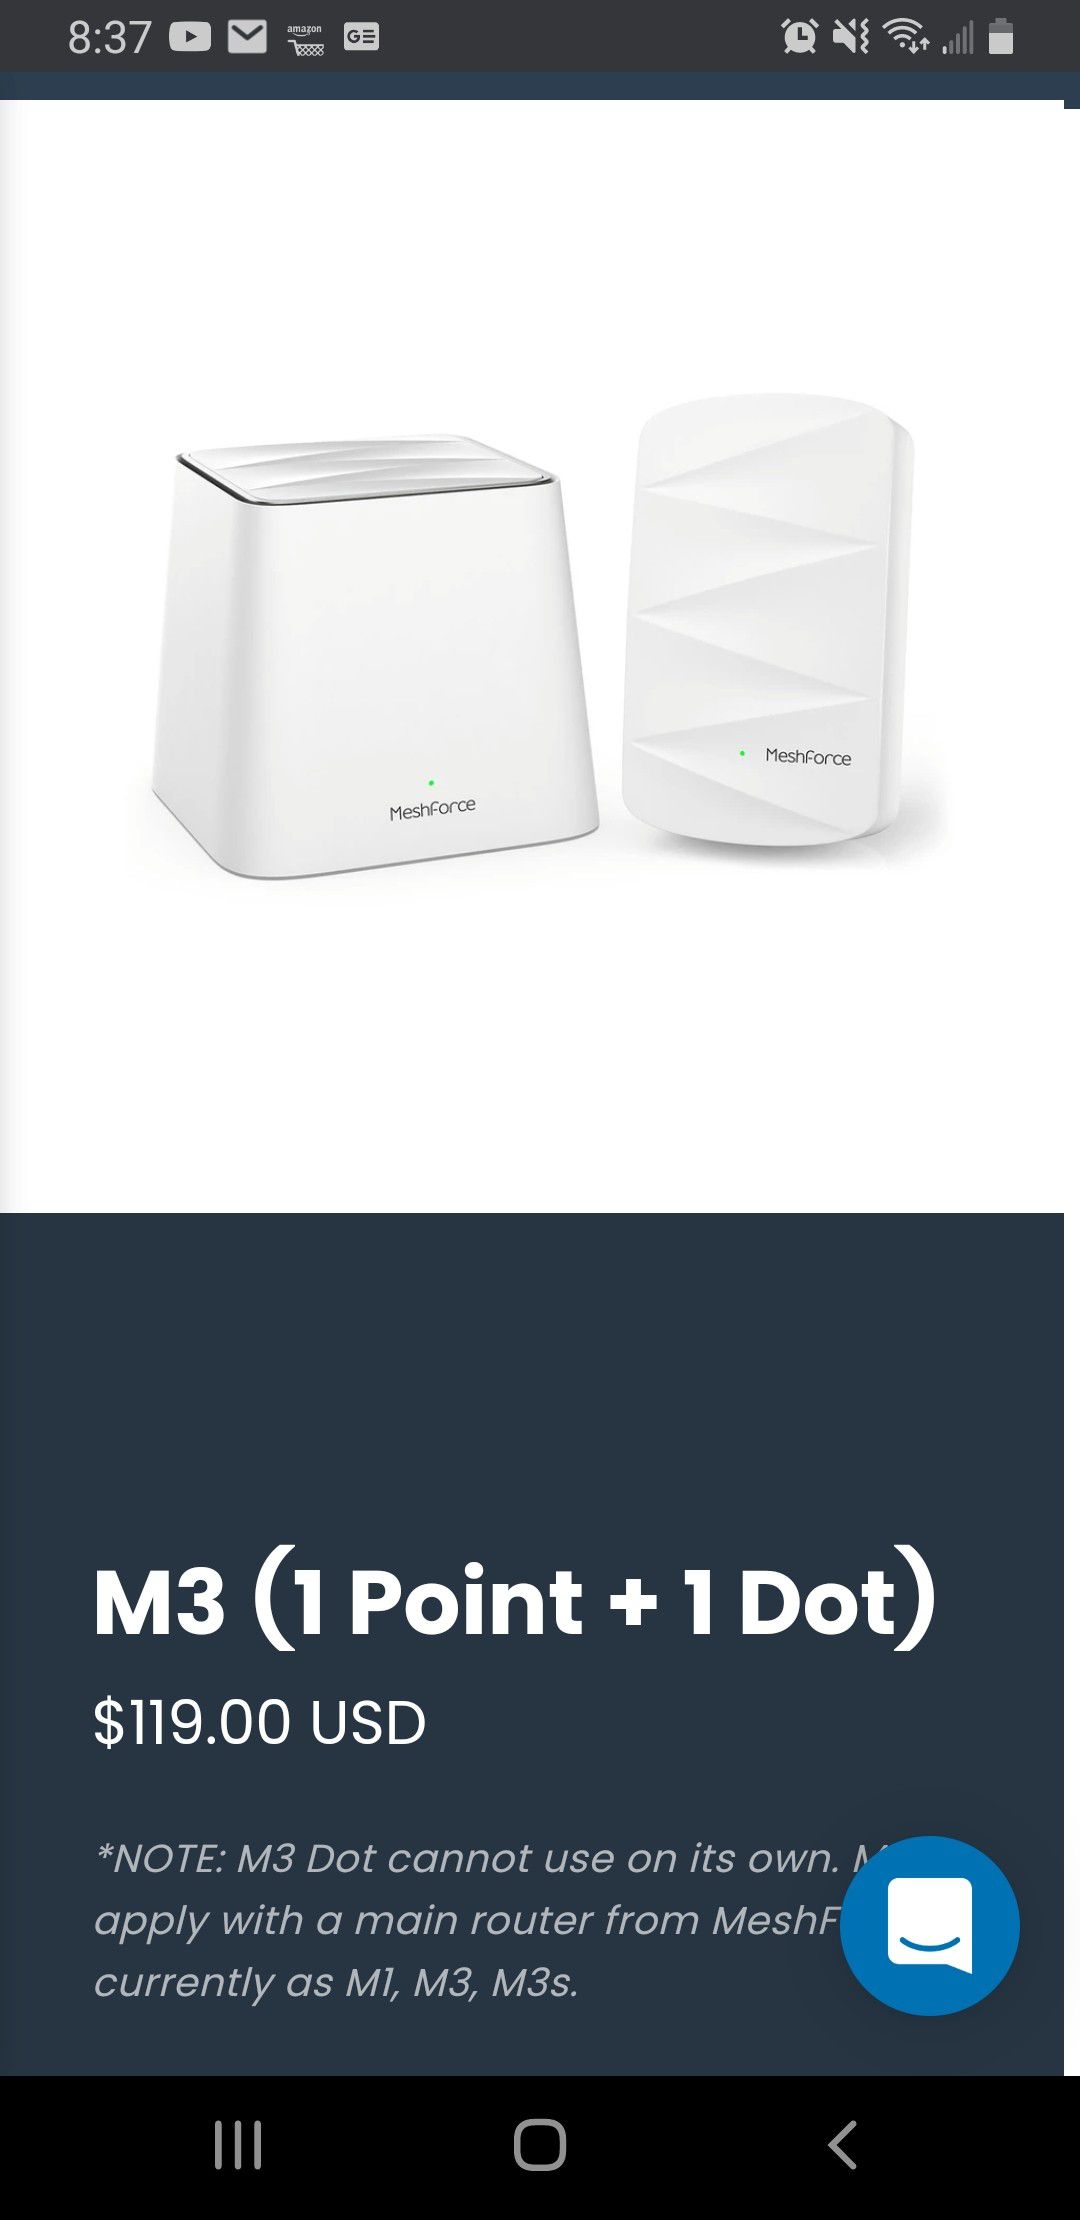 M3 wifi mesh router system